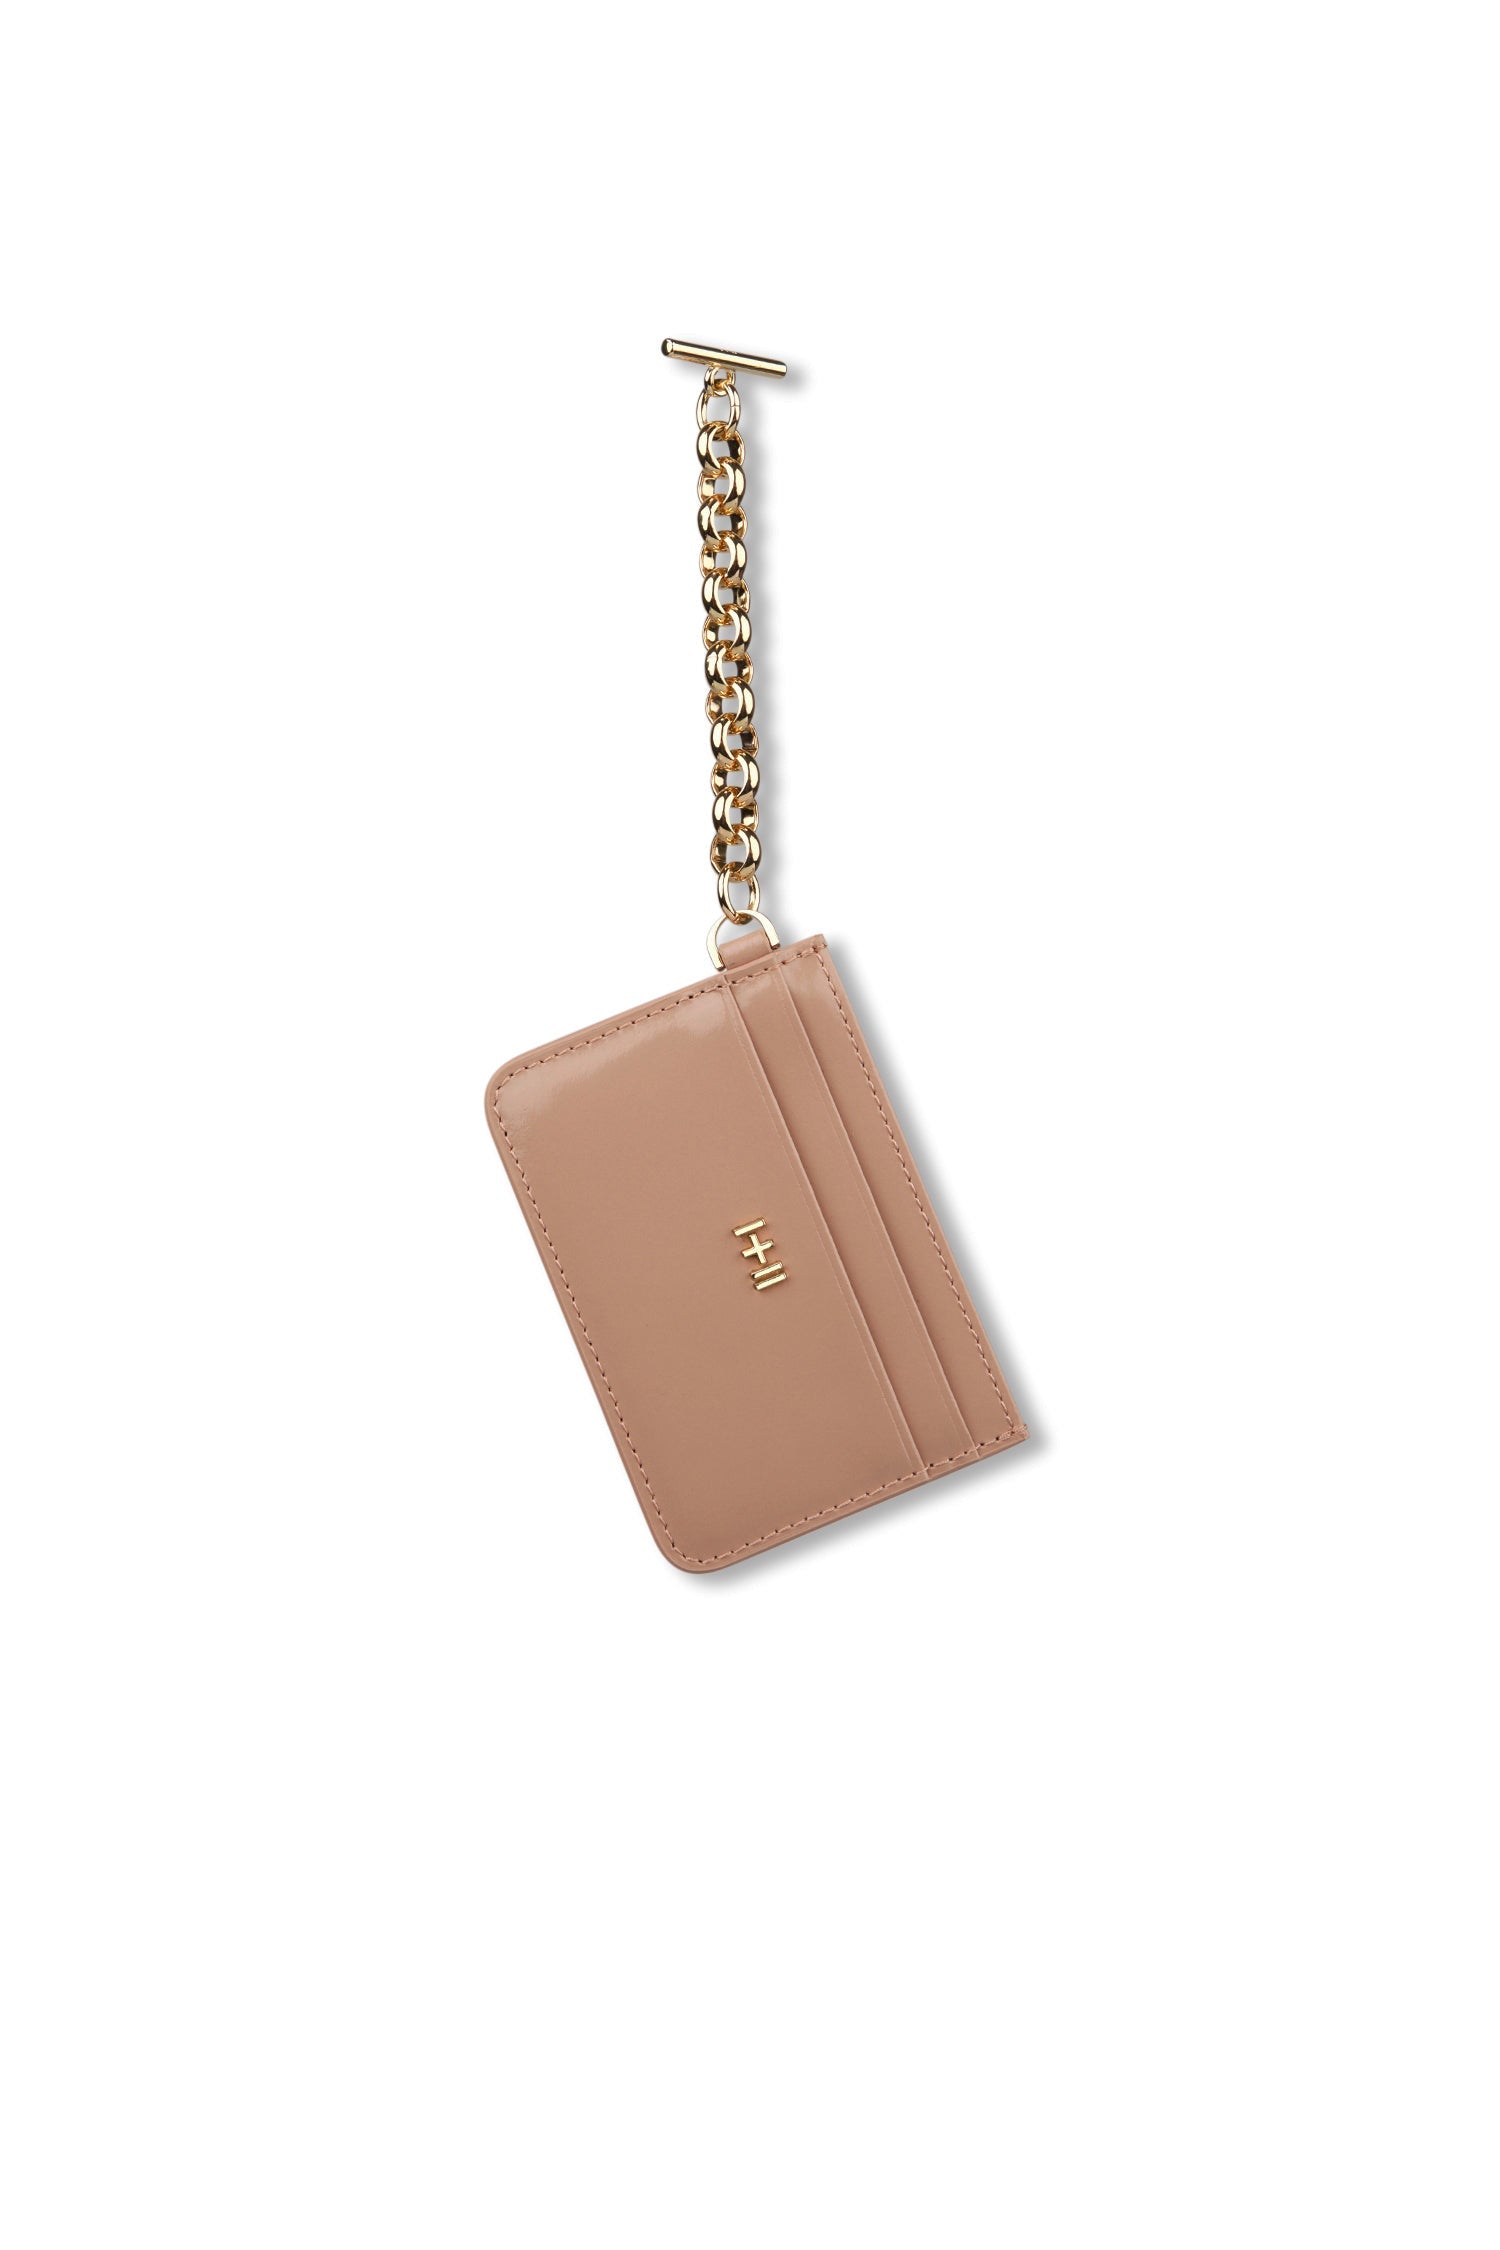 The Yumi Card Holder Fawn Light Gold - Gift Edit